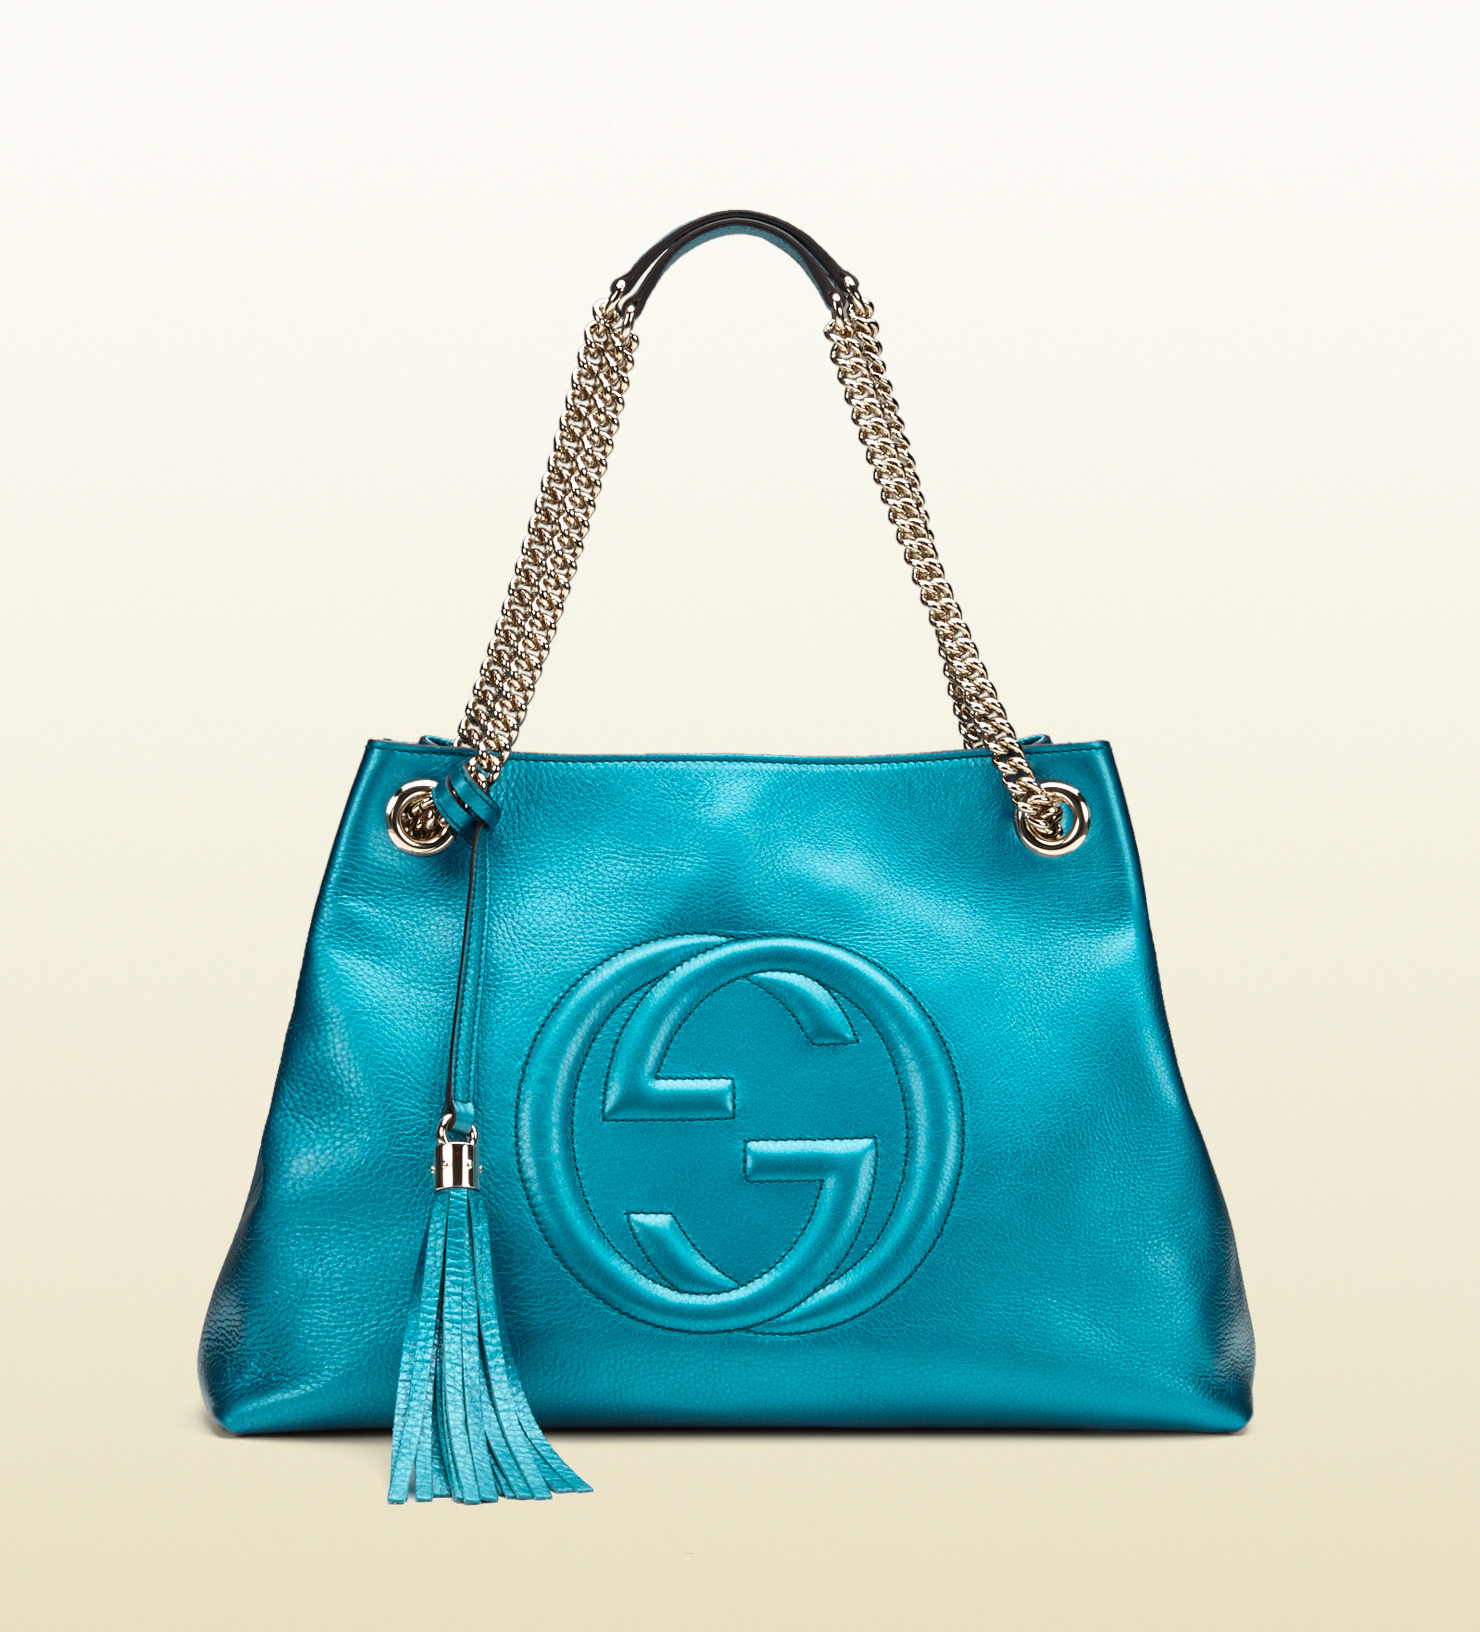 Gucci Online Exclusive Soho Metallic Leather Shoulder Bag in Blue (teal) | Lyst